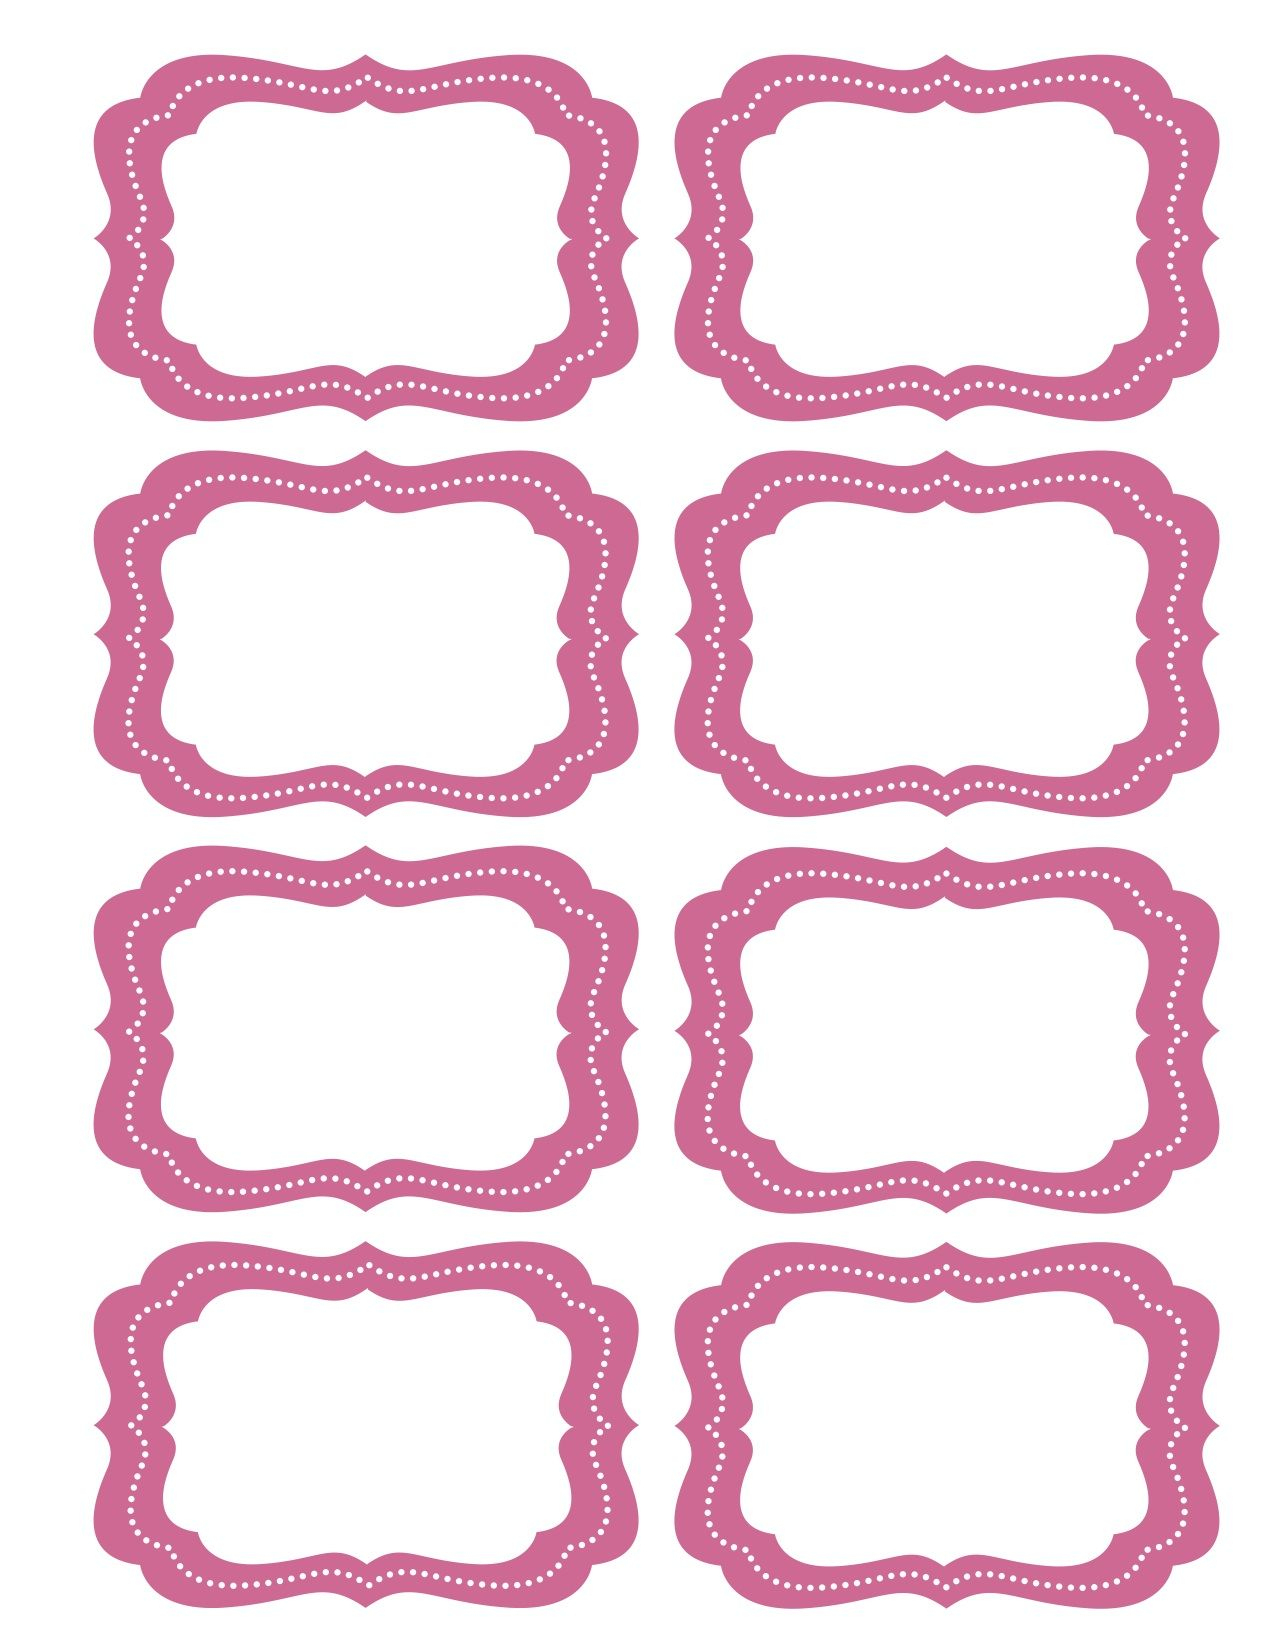 Free Printable Bag Label Templates | Candy Labels Blank Image - Free Printable Label Templates